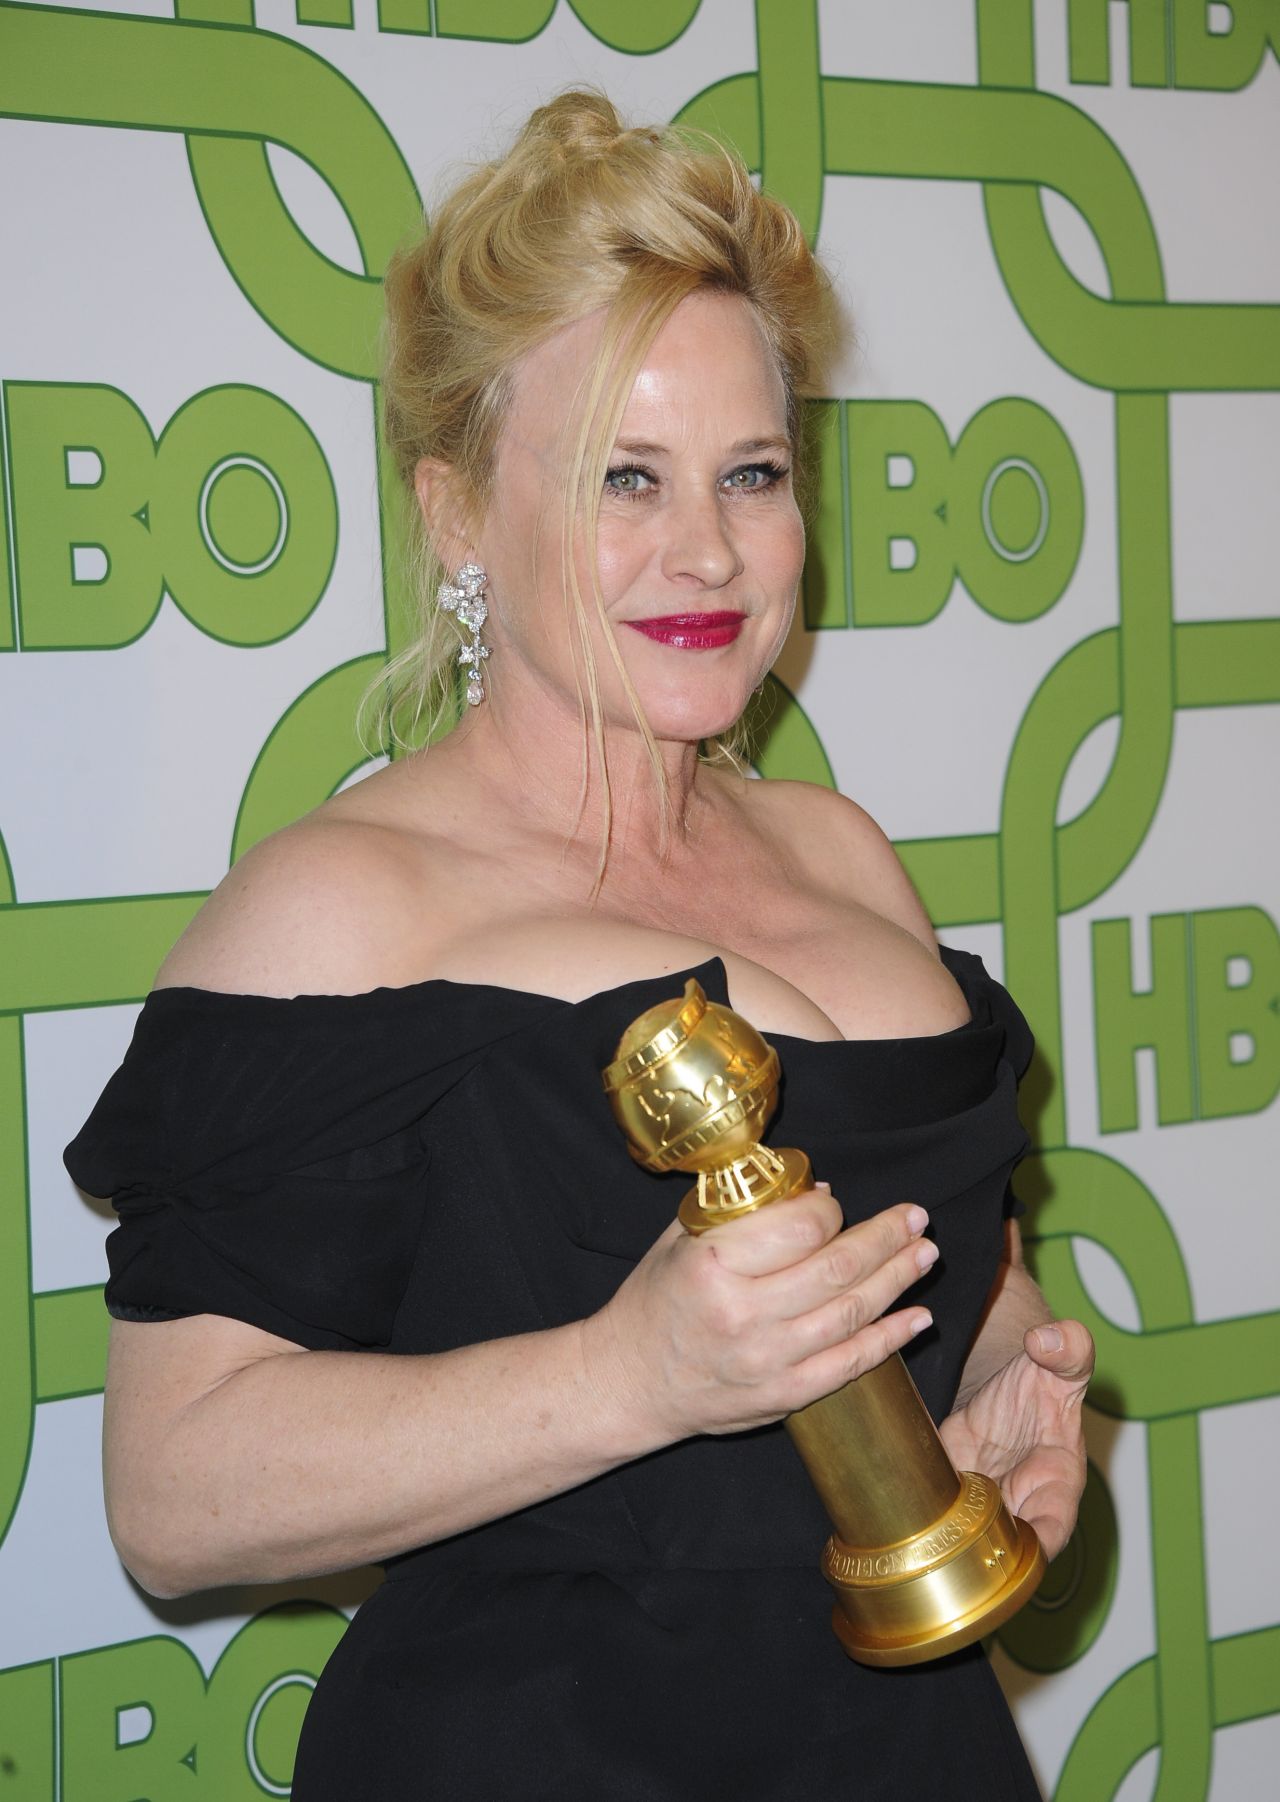 https://celebmafia.com/wp-content/uploads/2019/01/patricia-arquette-2019-hbo-official-golden-globe-awards-after-party-2.jpg